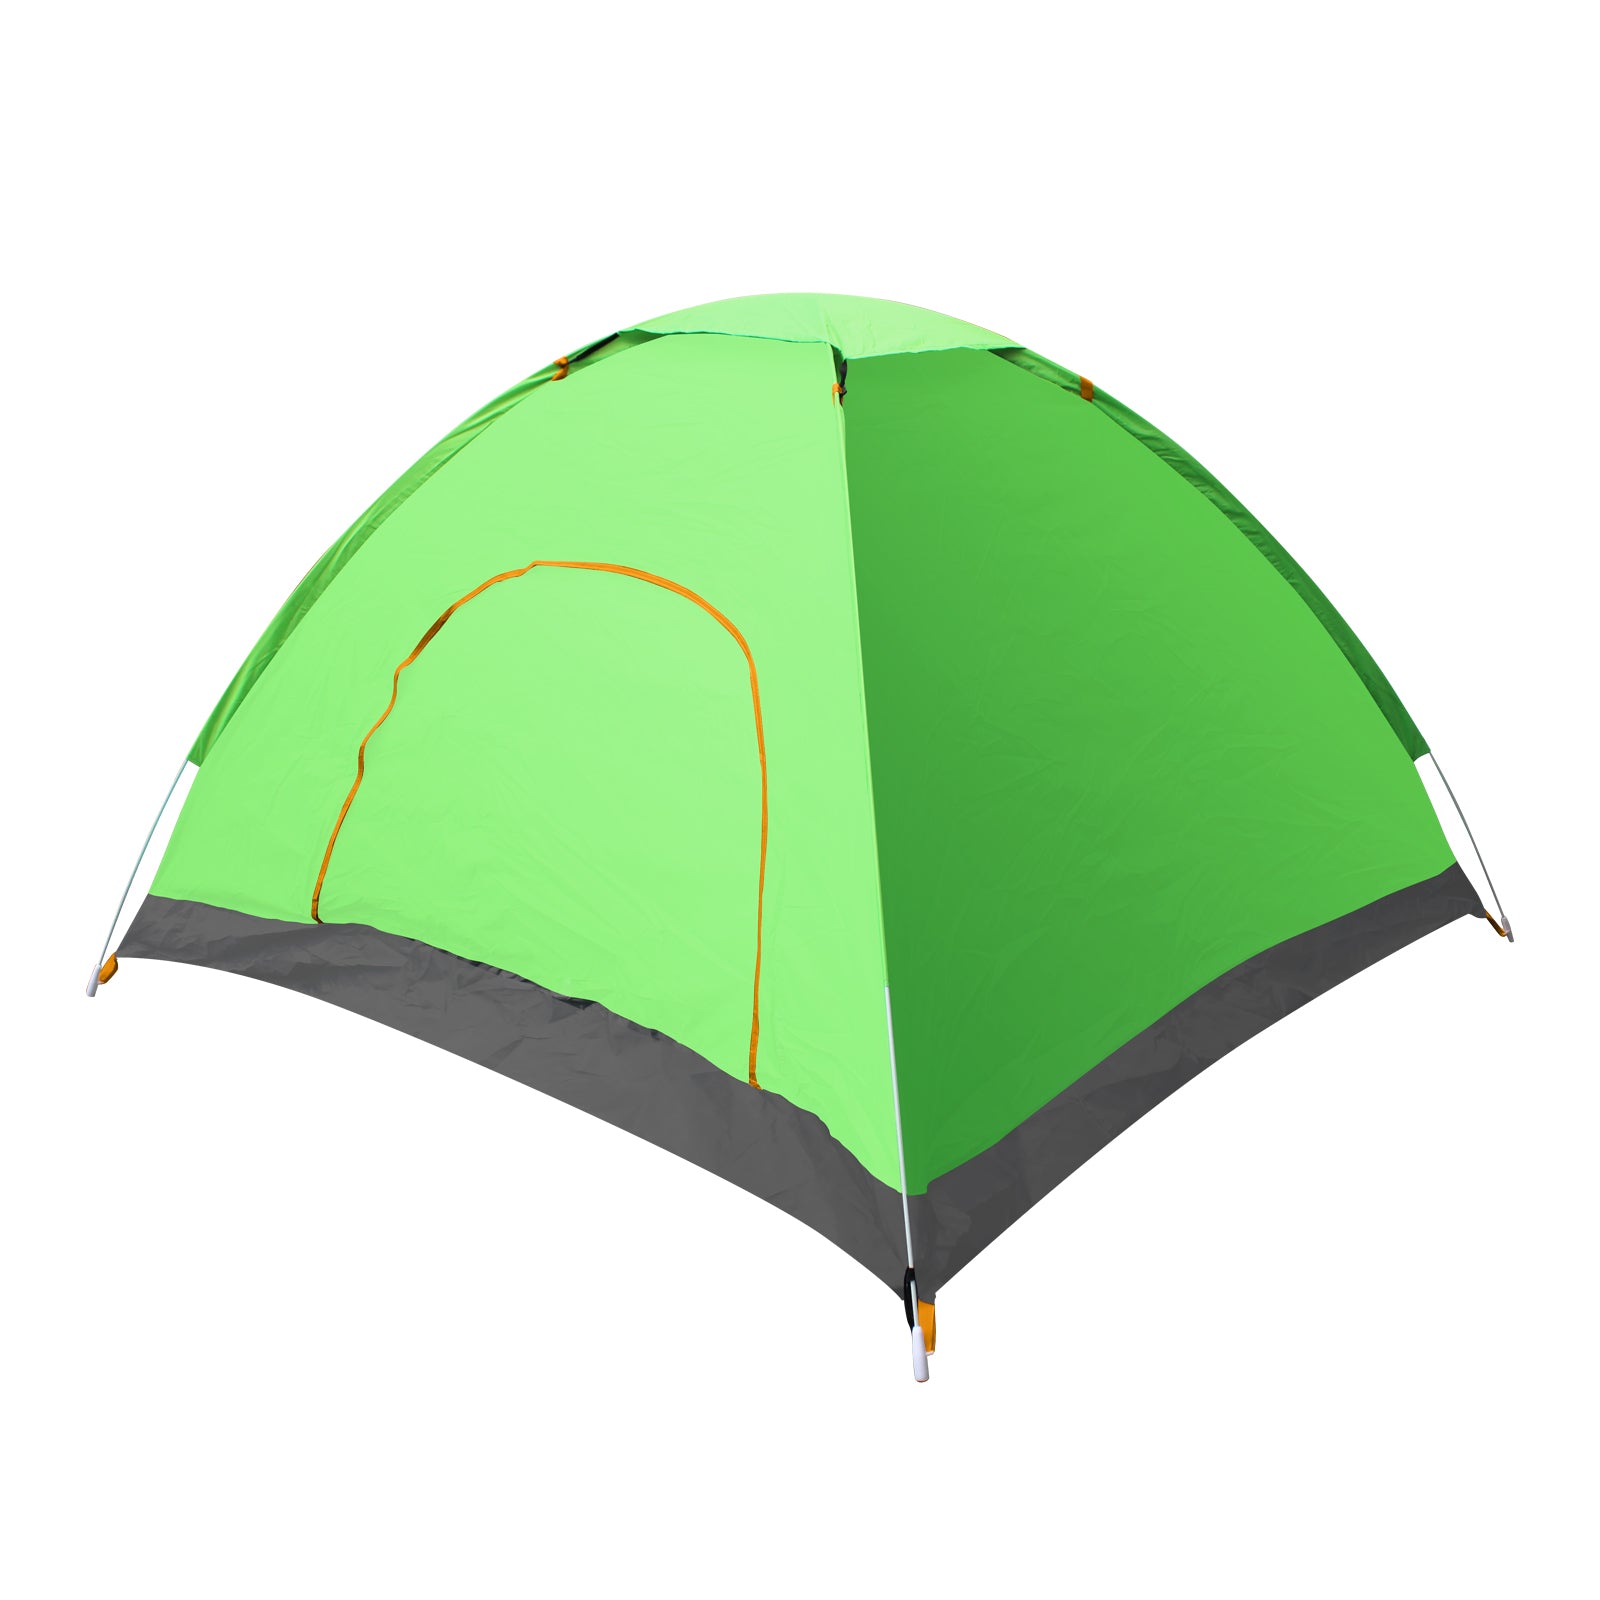 Green Pop Up Tent for Camping